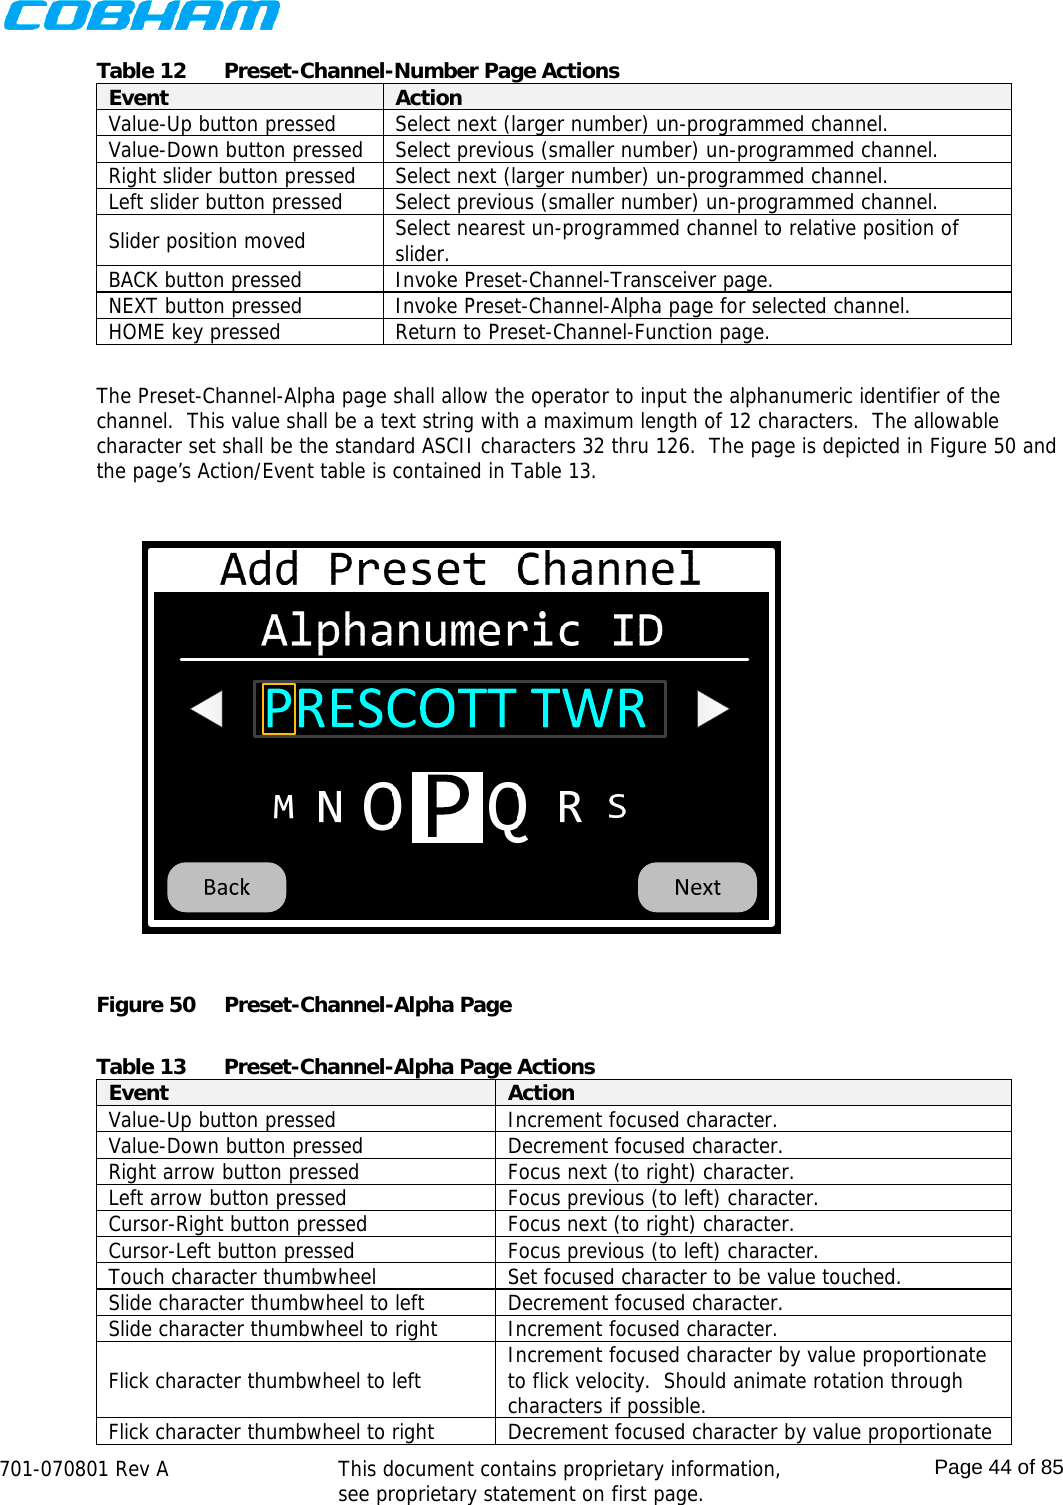    701-070801 Rev A   This document contains proprietary information, see proprietary statement on first page.  Page 44 of 85  Table 12  Preset-Channel-Number Page Actions Event  Action Value-Up button pressed  Select next (larger number) un-programmed channel. Value-Down button pressed  Select previous (smaller number) un-programmed channel. Right slider button pressed  Select next (larger number) un-programmed channel. Left slider button pressed  Select previous (smaller number) un-programmed channel. Slider position moved  Select nearest un-programmed channel to relative position of slider. BACK button pressed  Invoke Preset-Channel-Transceiver page. NEXT button pressed  Invoke Preset-Channel-Alpha page for selected channel. HOME key pressed  Return to Preset-Channel-Function page.  The Preset-Channel-Alpha page shall allow the operator to input the alphanumeric identifier of the channel.  This value shall be a text string with a maximum length of 12 characters.  The allowable character set shall be the standard ASCII characters 32 thru 126.  The page is depicted in Figure 50 and the page’s Action/Event table is contained in Table 13.  Figure 50  Preset-Channel-Alpha Page  Table 13  Preset-Channel-Alpha Page Actions Event  Action Value-Up button pressed  Increment focused character. Value-Down button pressed  Decrement focused character. Right arrow button pressed  Focus next (to right) character. Left arrow button pressed  Focus previous (to left) character. Cursor-Right button pressed  Focus next (to right) character. Cursor-Left button pressed  Focus previous (to left) character. Touch character thumbwheel  Set focused character to be value touched. Slide character thumbwheel to left  Decrement focused character. Slide character thumbwheel to right  Increment focused character. Flick character thumbwheel to left  Increment focused character by value proportionate to flick velocity.  Should animate rotation through characters if possible. Flick character thumbwheel to right  Decrement focused character by value proportionate 